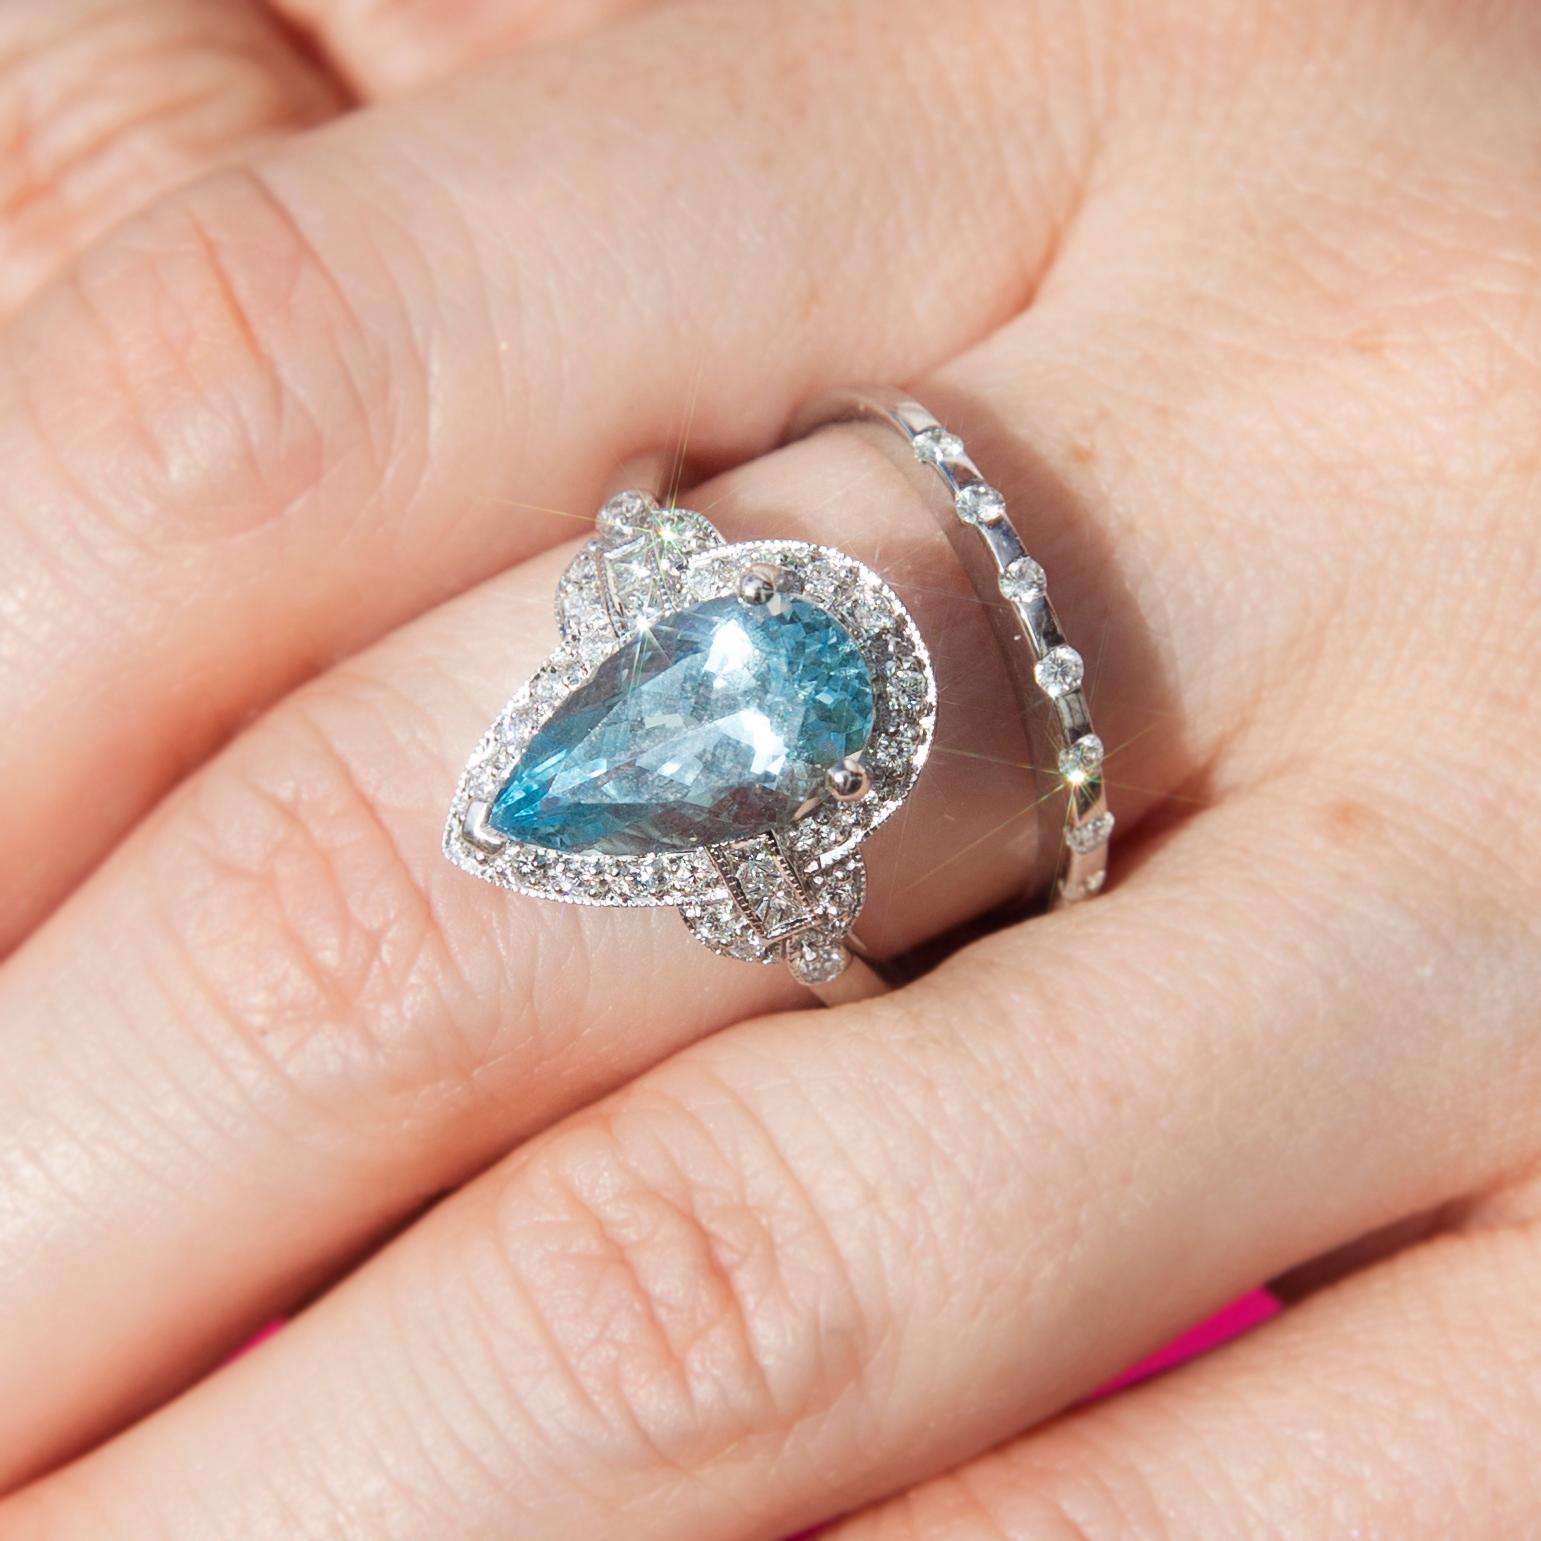 Crafted with love and care in 18 carat white gold, this fabulous art deco-inspired ring features a stunning pear-shaped faceted fine blue 2.95-carat aquamarine complemented by a captivating border of scintillating round brilliant cut diamonds